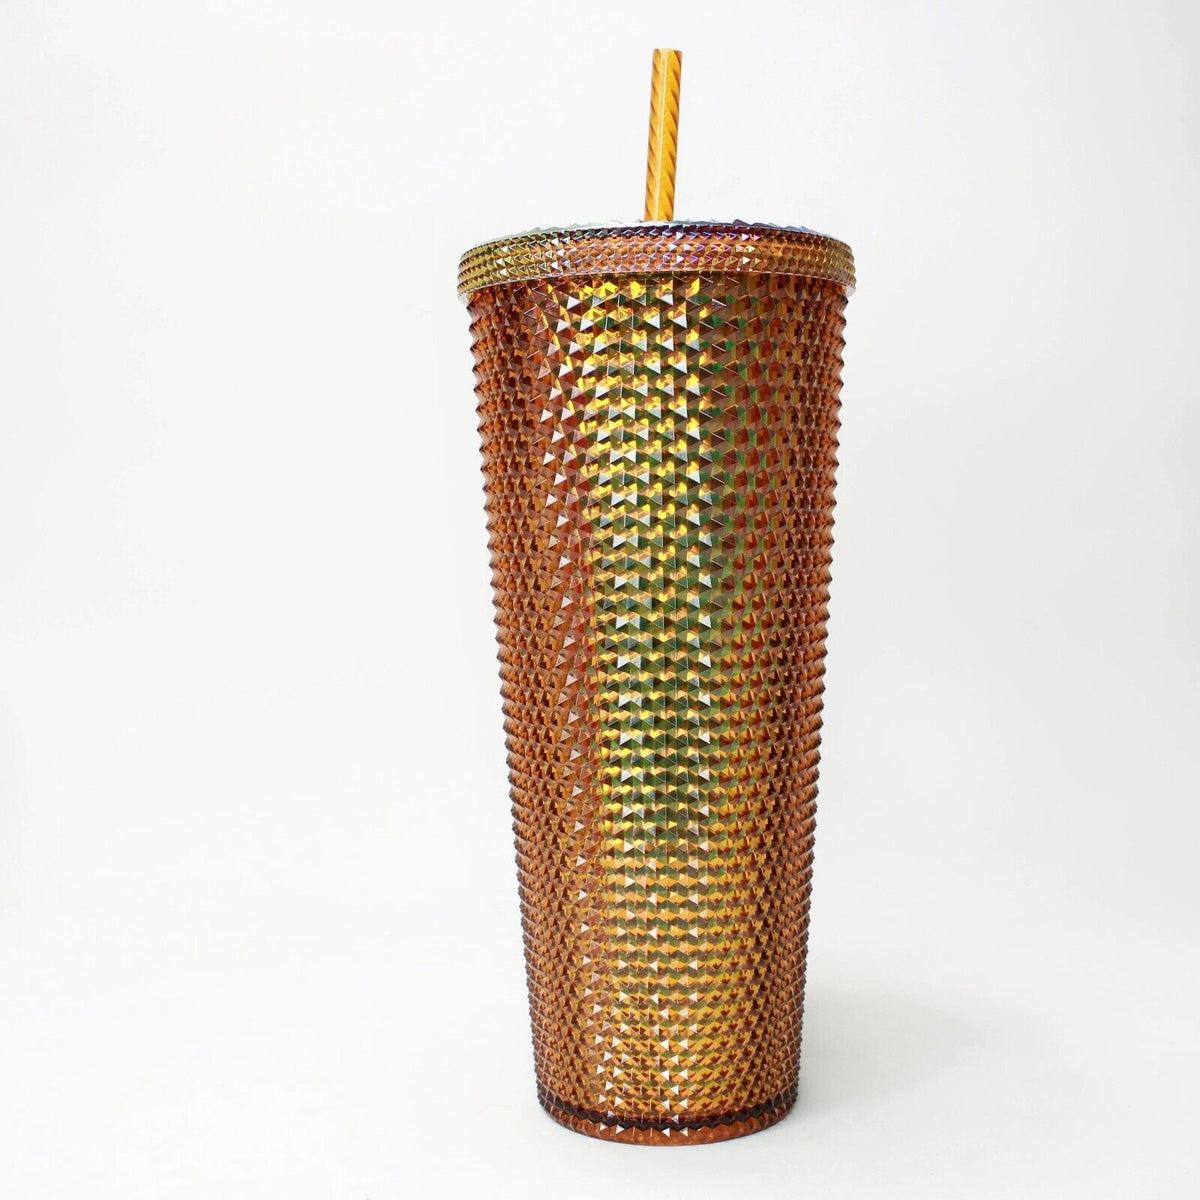 Starbucks 50th Anniversary Gold Dome Straw 24oz cup - order before rea